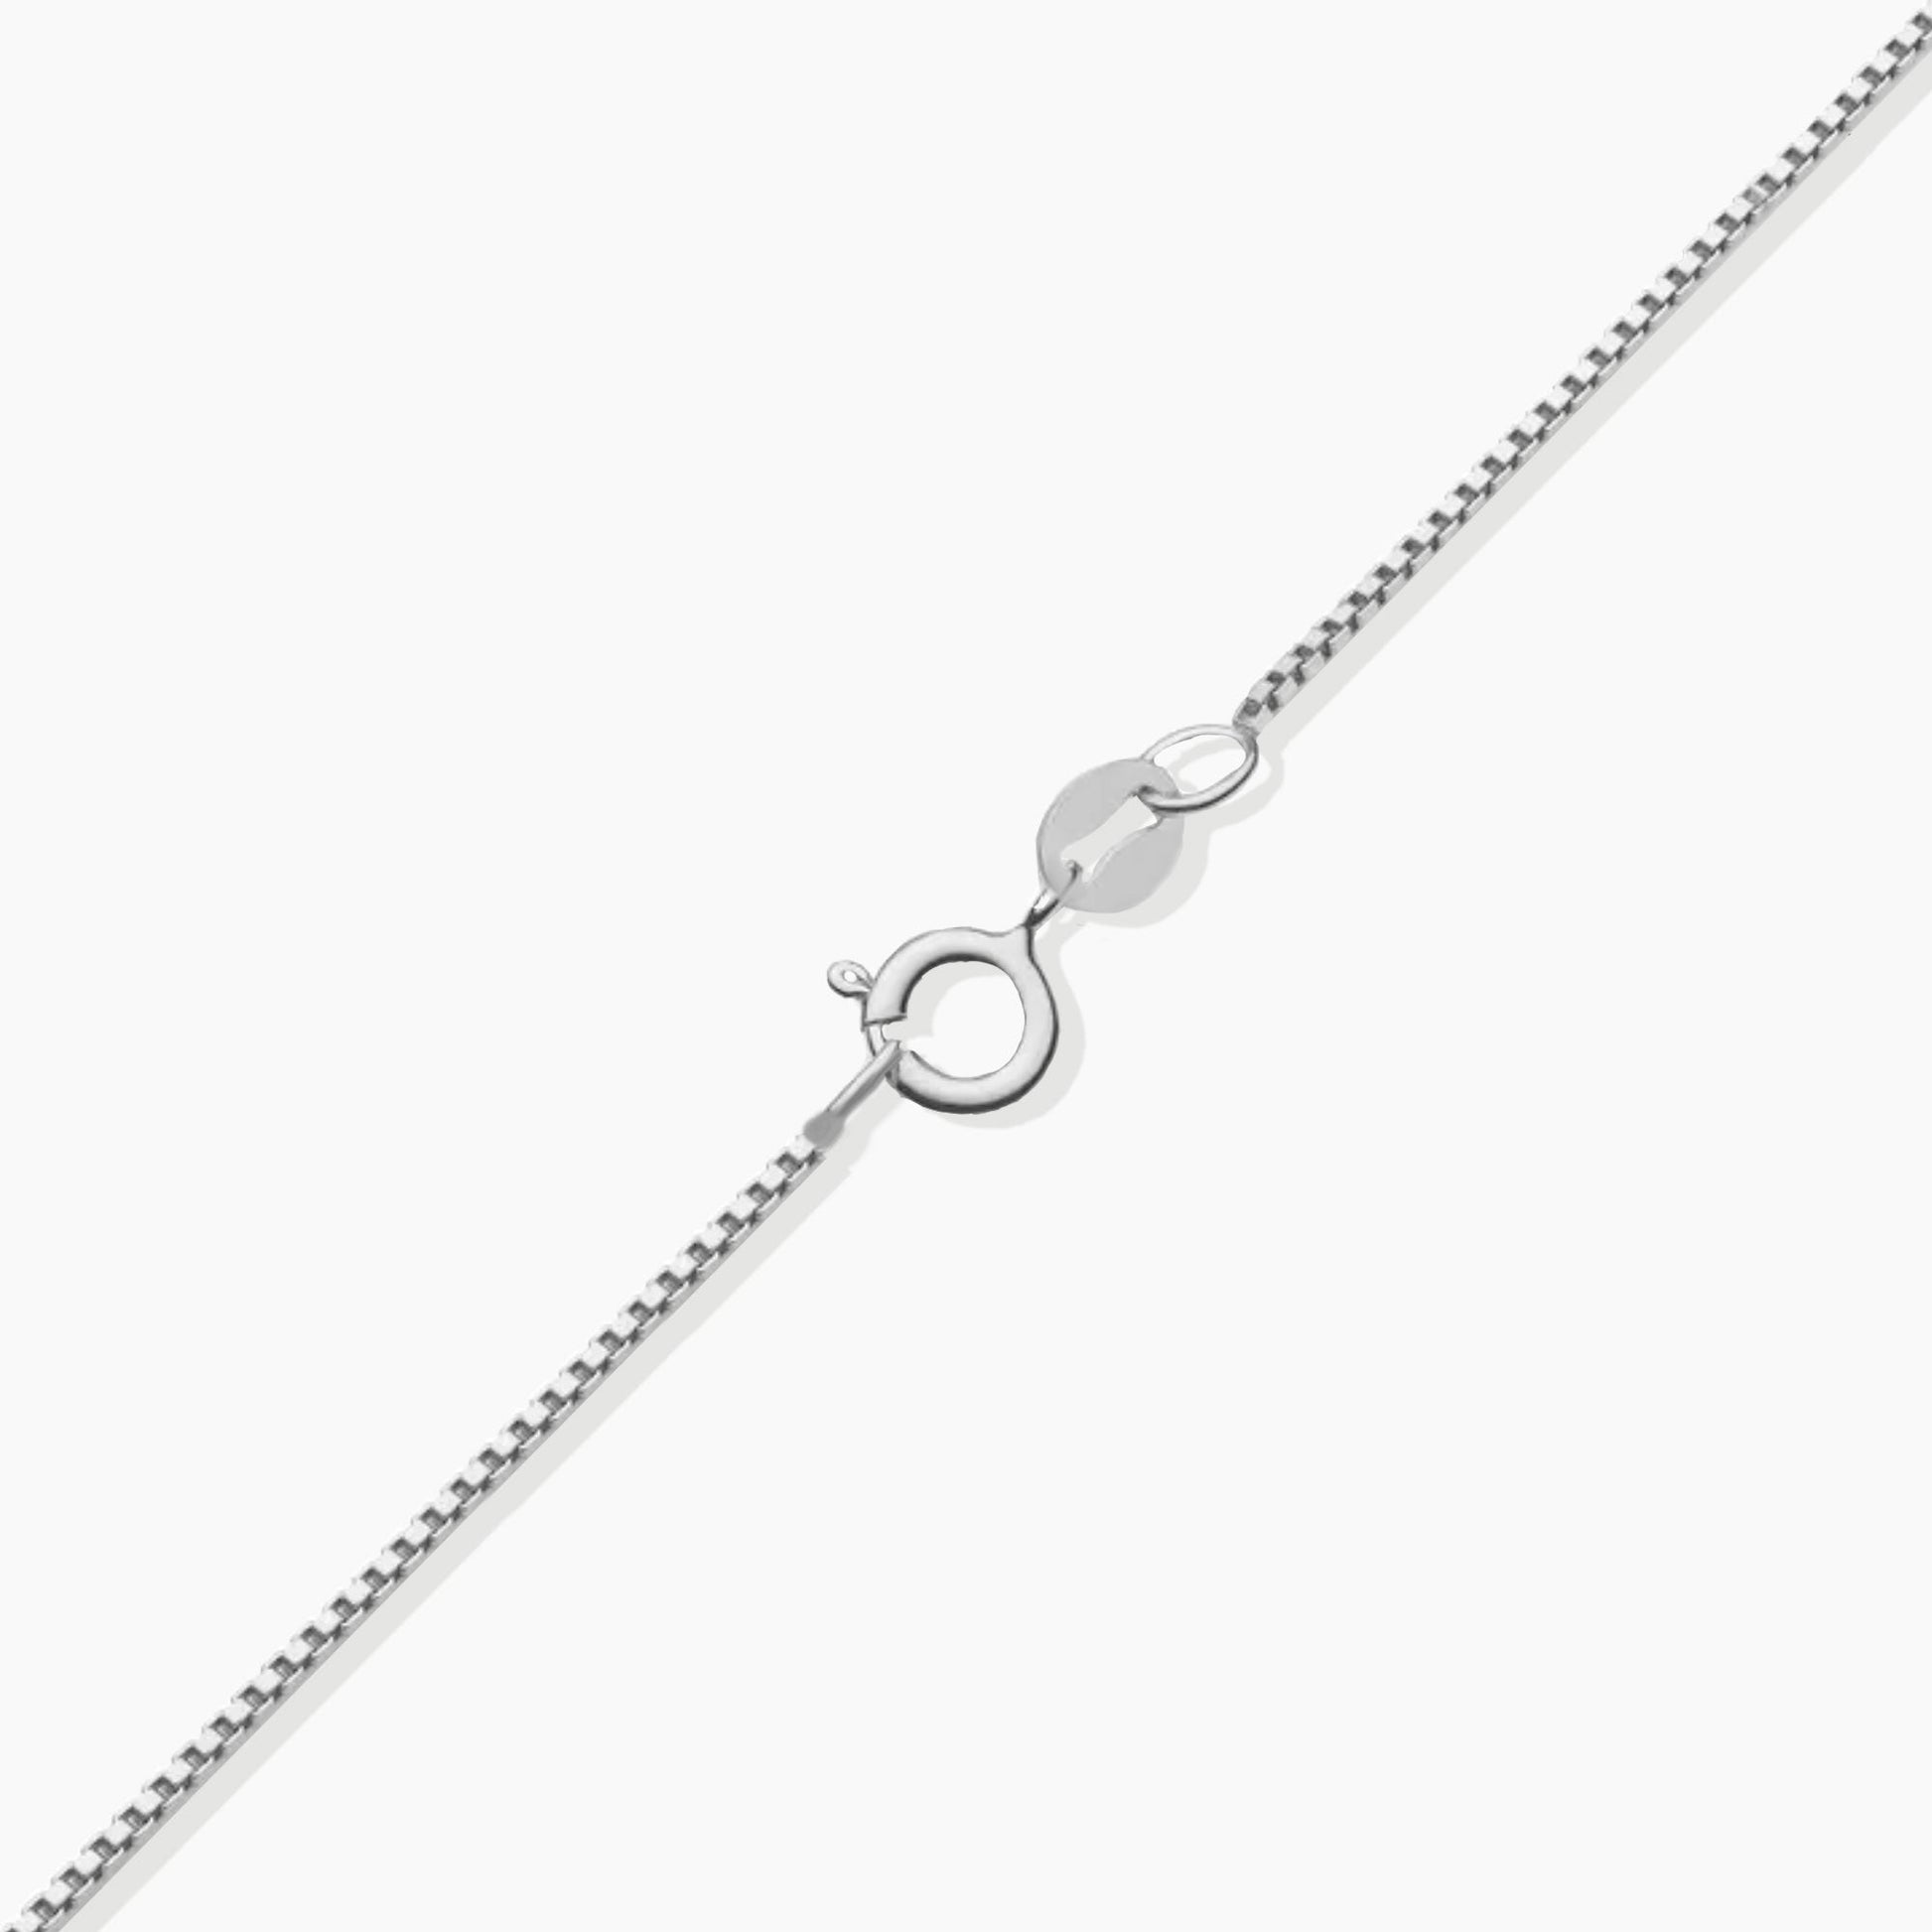 Sterling silver chain with semi-bezel setting for London Blue Topaz Monarch Pendant